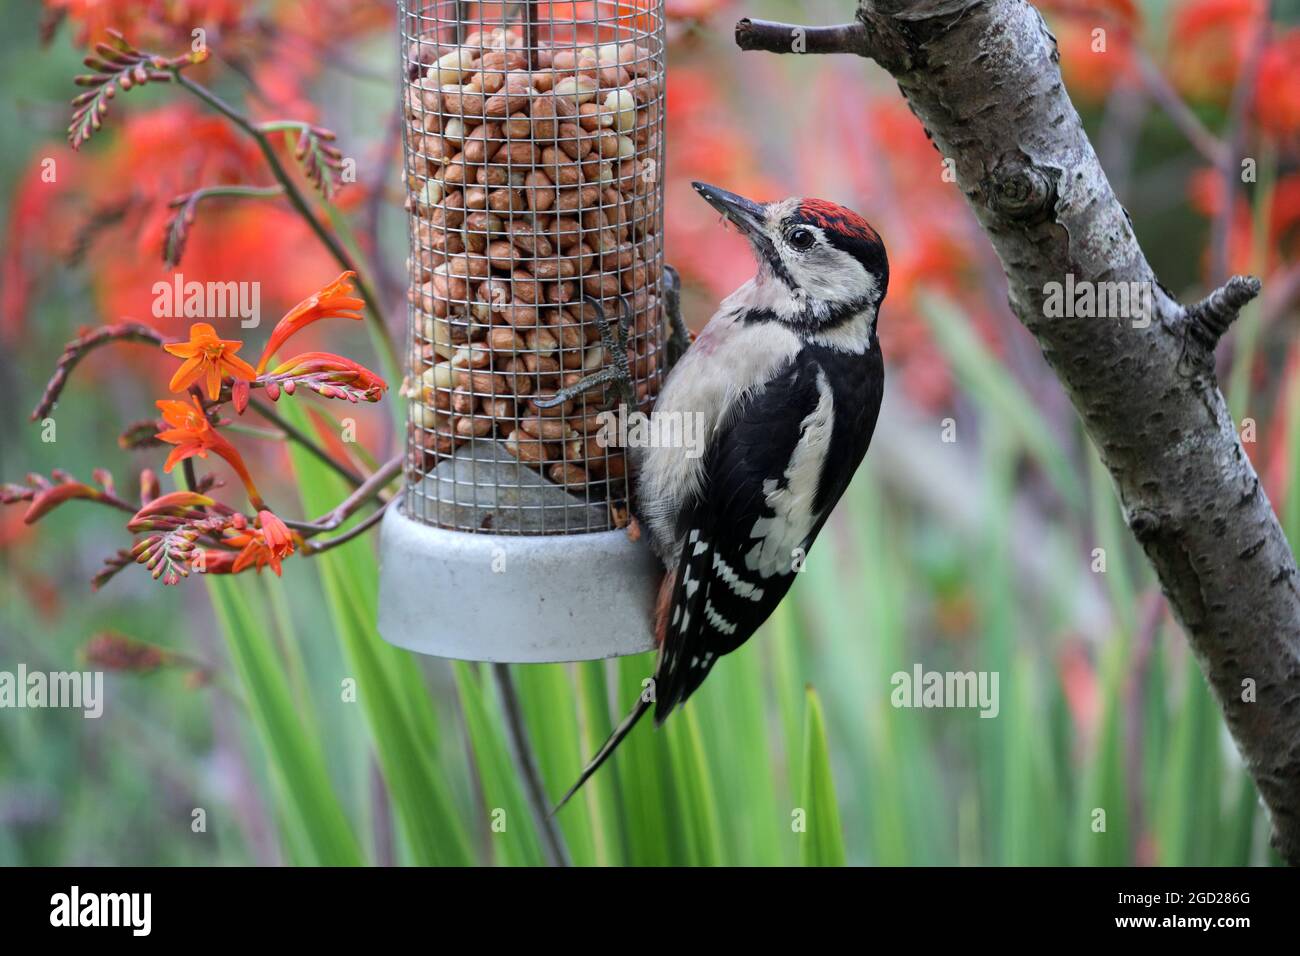 Young Great Spotted Woodpecker (Dendrocopus major) in a Garden Environment, UK. Stock Photo